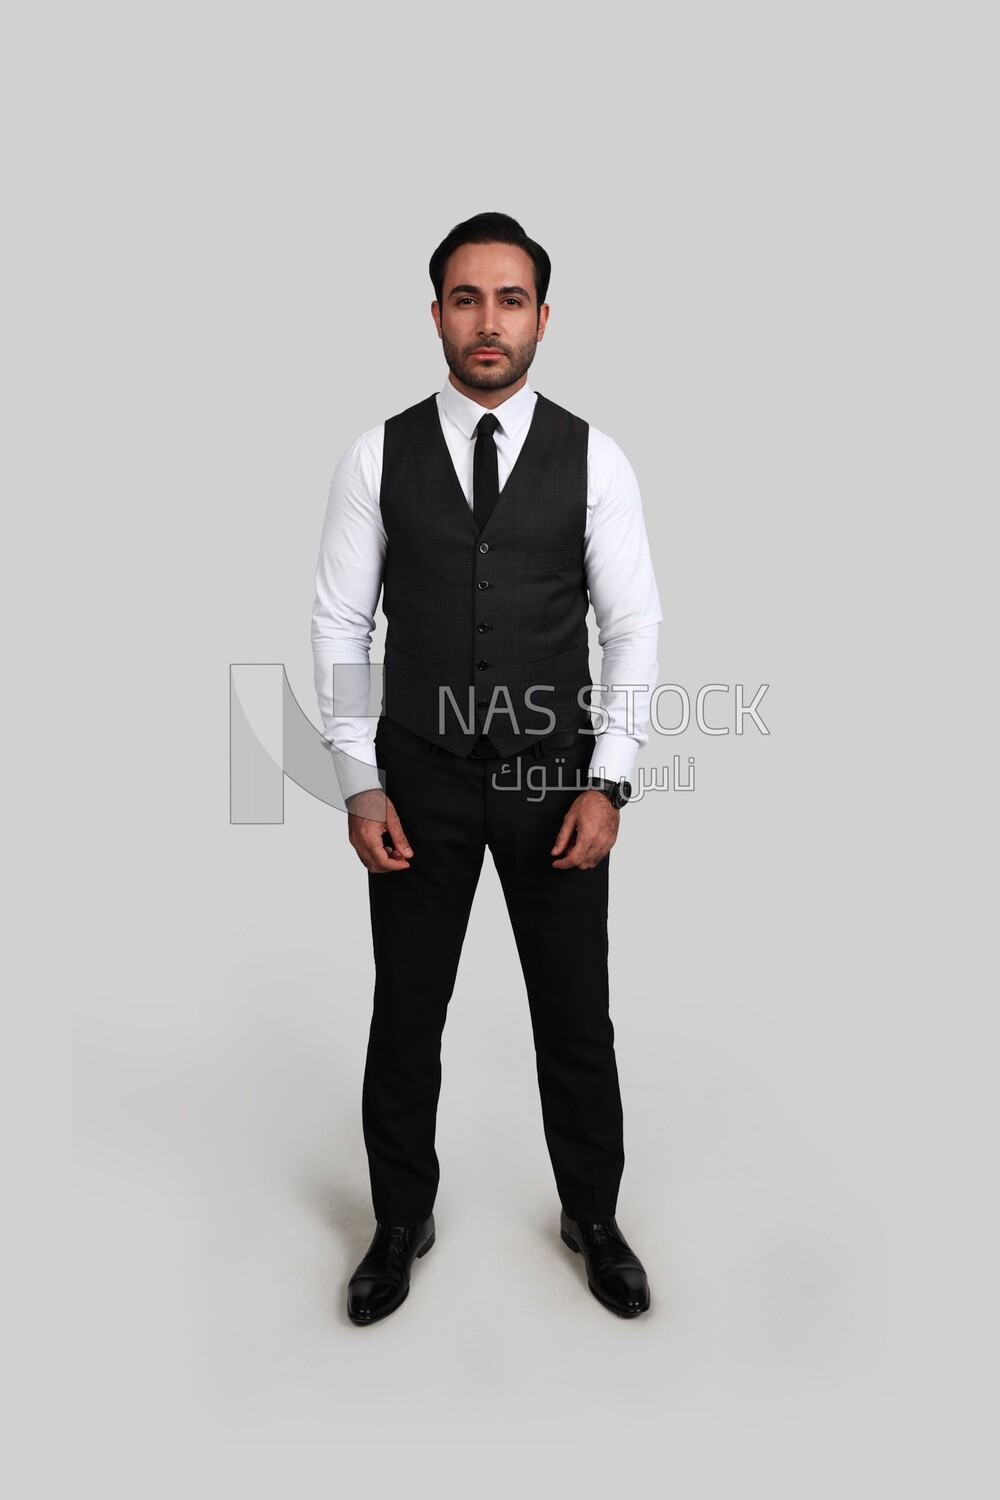 Photo of a businessman with a formal suit, business development and partnerships, business meeting, Model